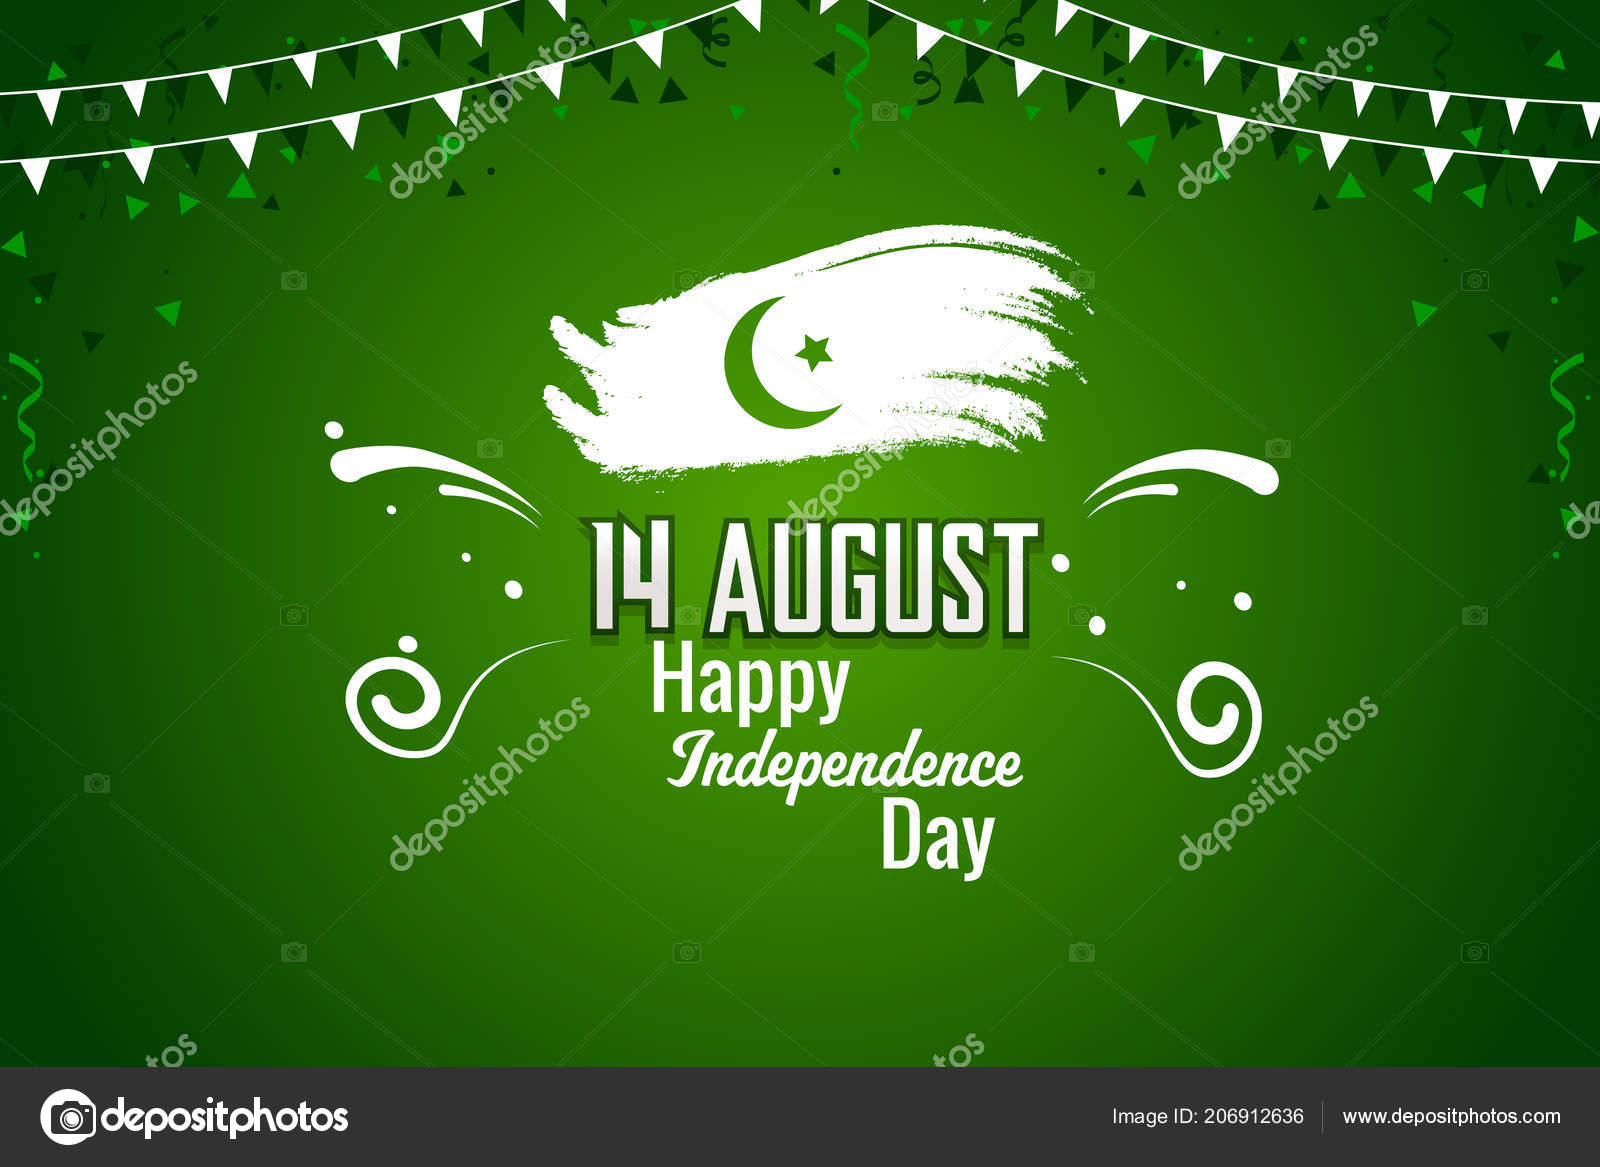 14 August Pakistan Independence Day - HD Wallpaper 